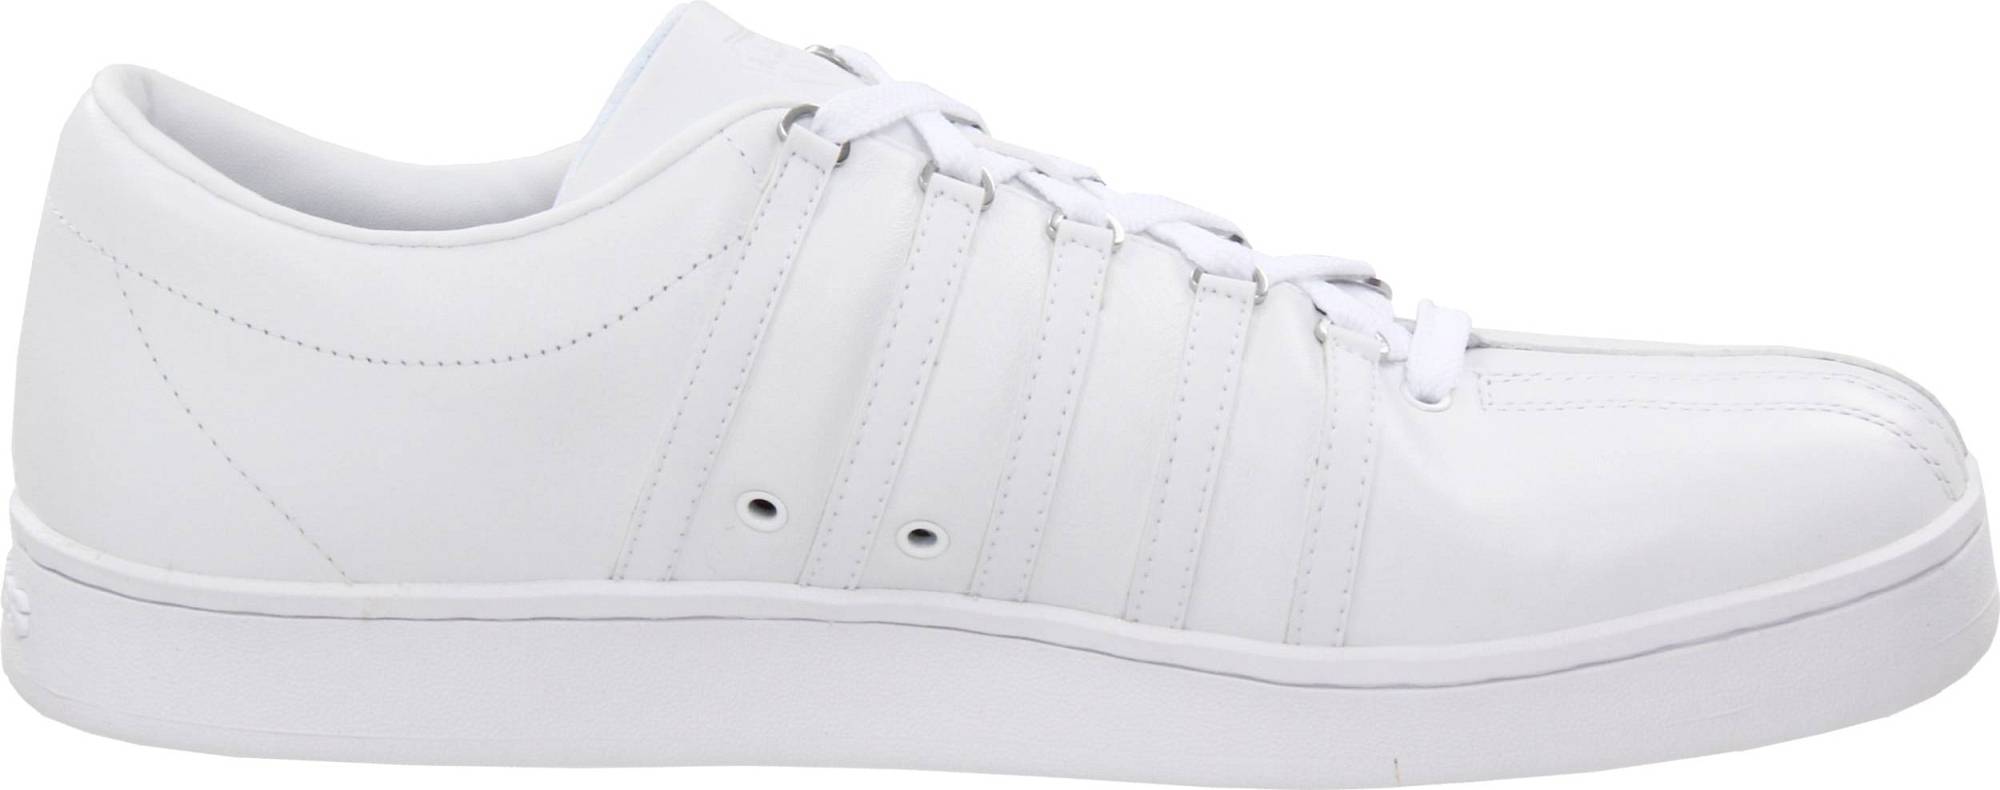 K-Swiss Classic 88 – Shoes Reviews & Reasons To Buy